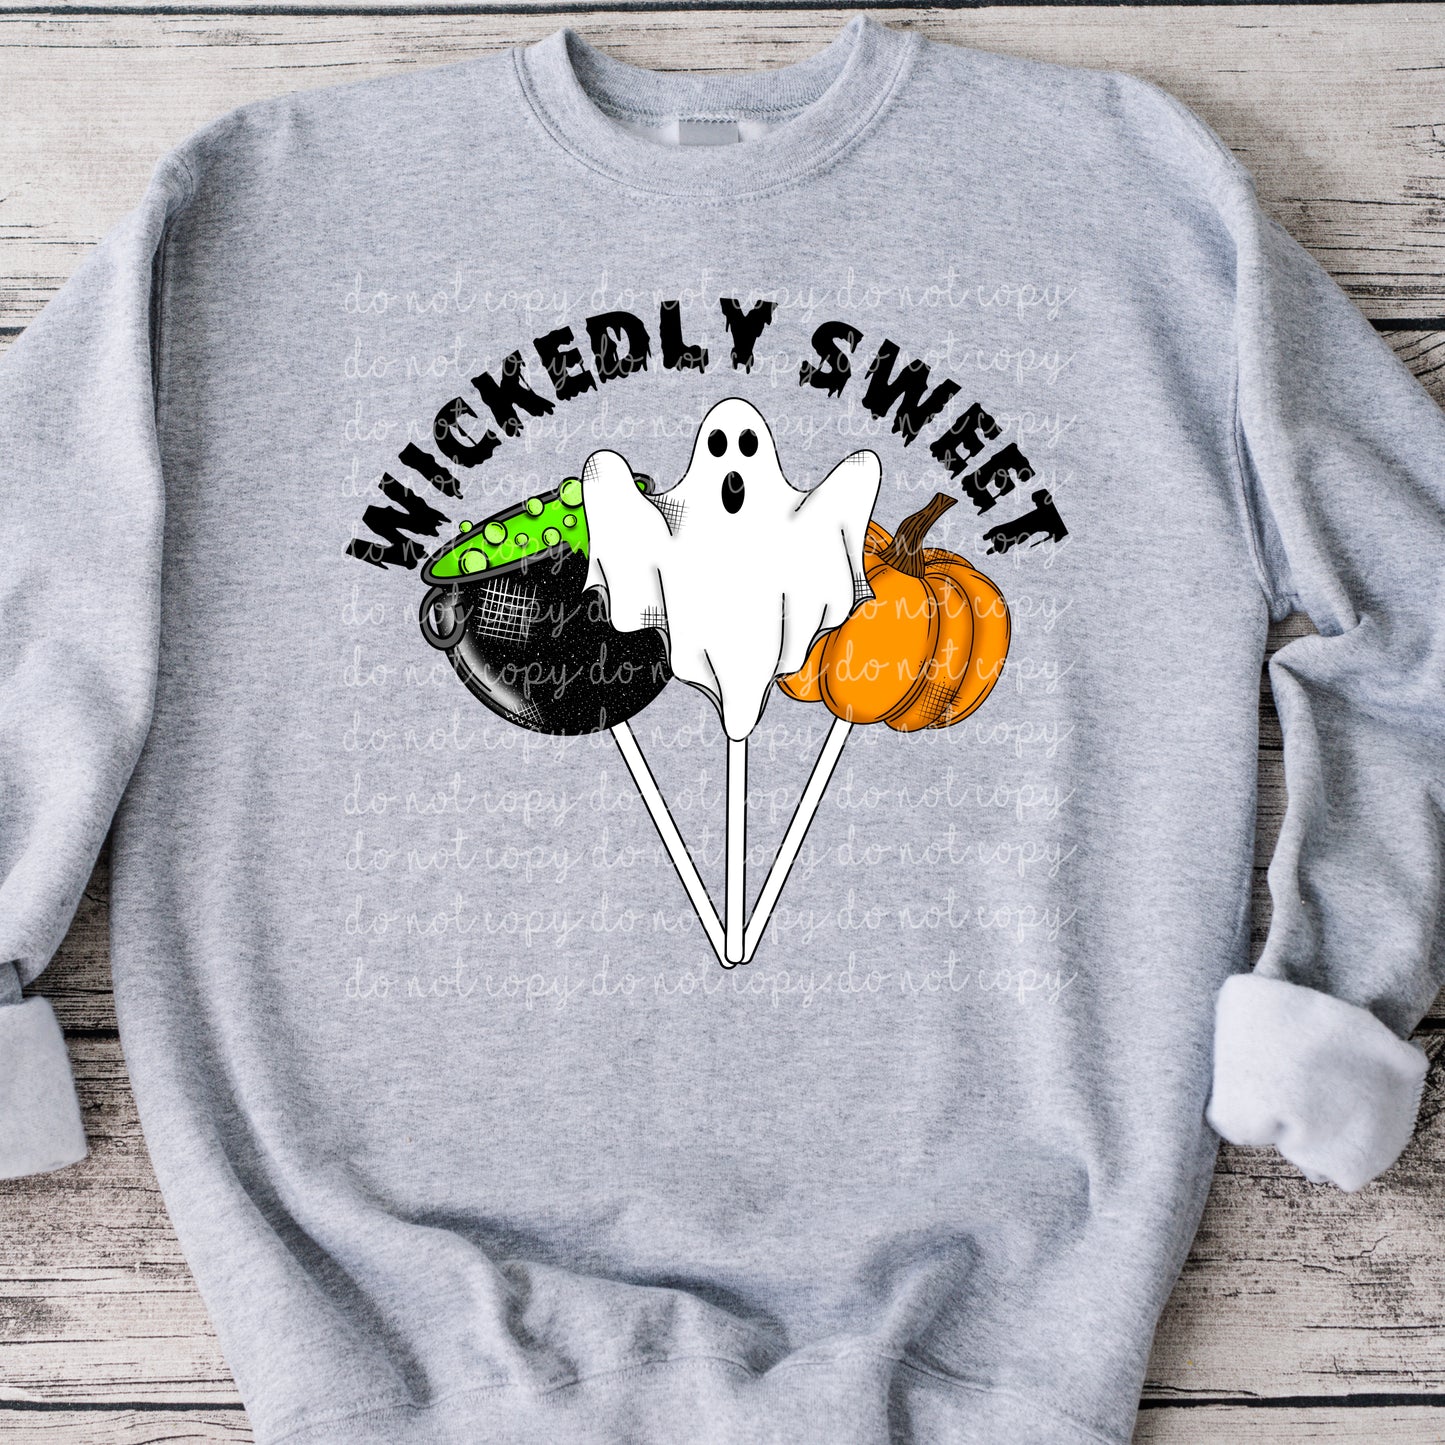 Wickedly Sweet Full Color  Cerra's Shop Creates   